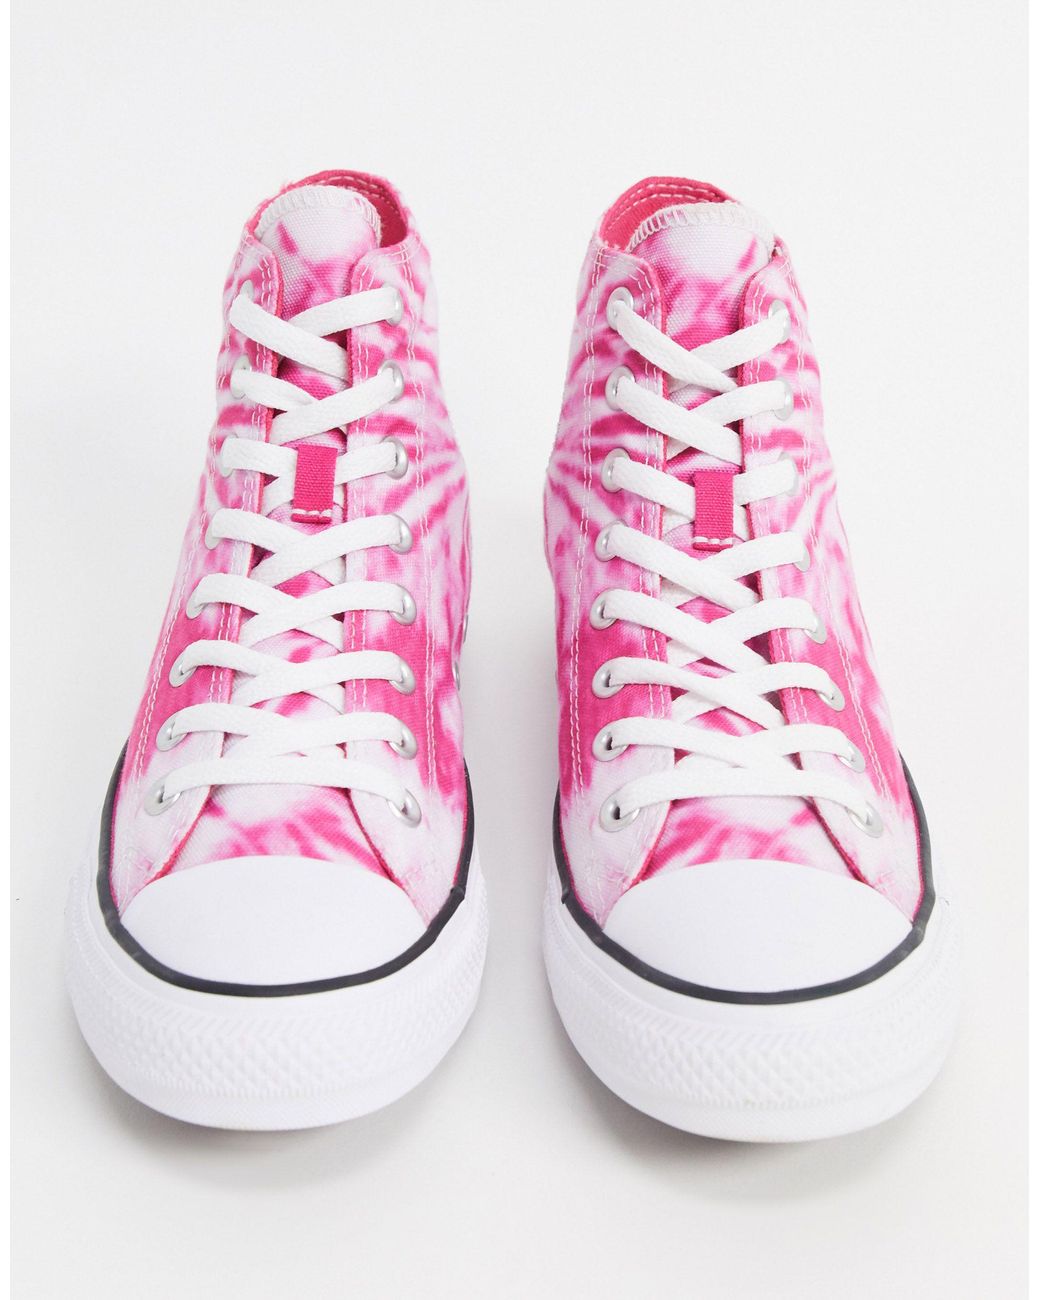 Converse Chuck Taylor All Star Hi Pink Tie Dye Trainers | Lyst